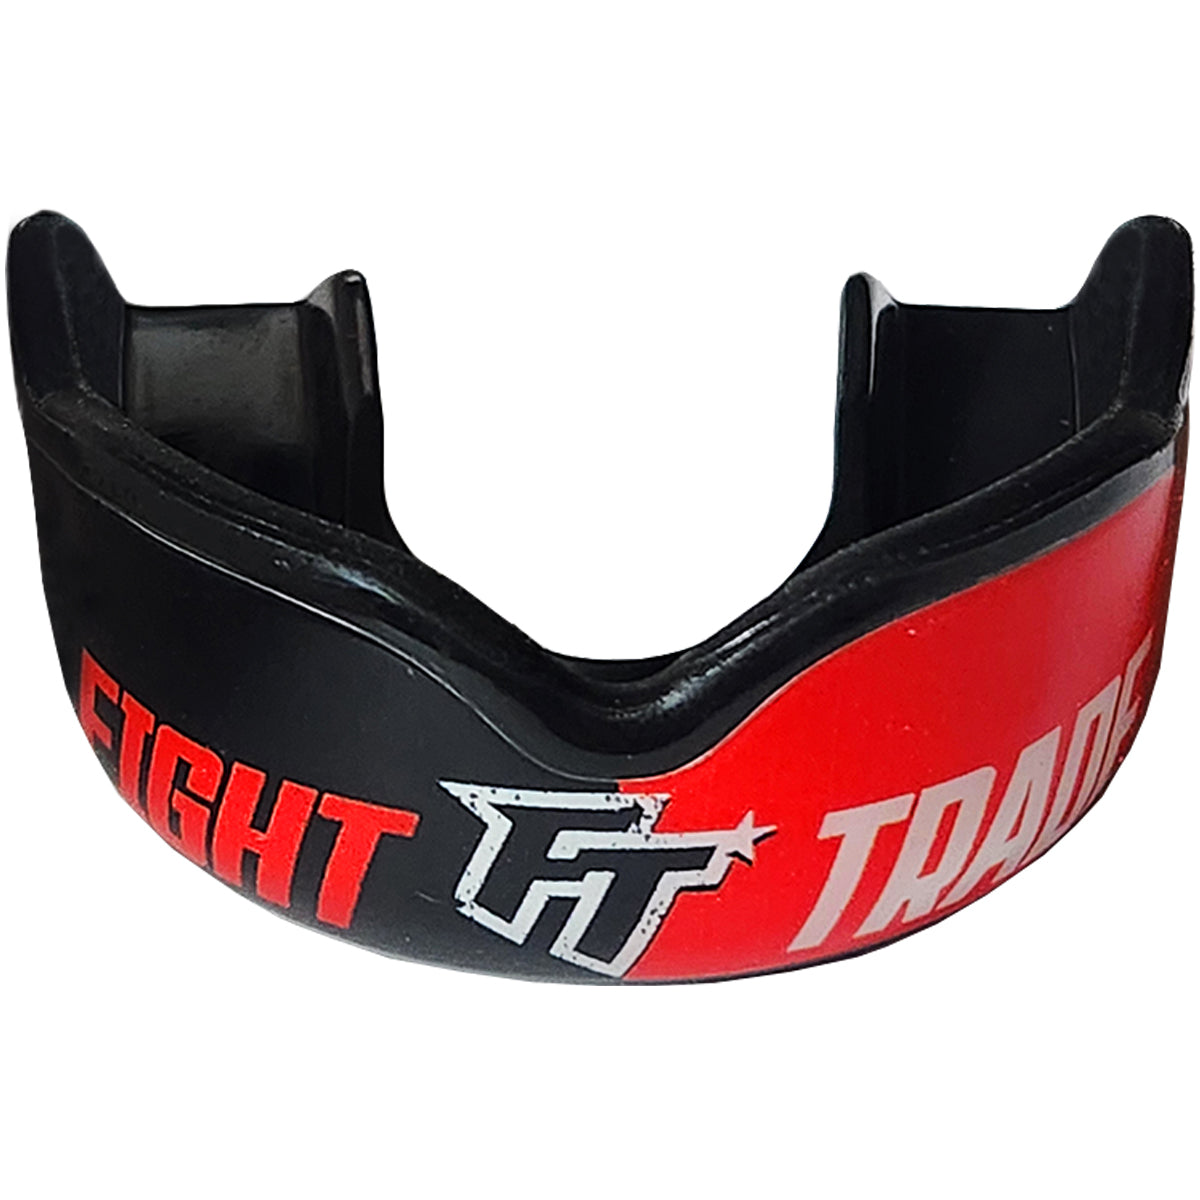 Mouthguard Protected High Impact - "Boil and Bite" Fight Trade Brand Black